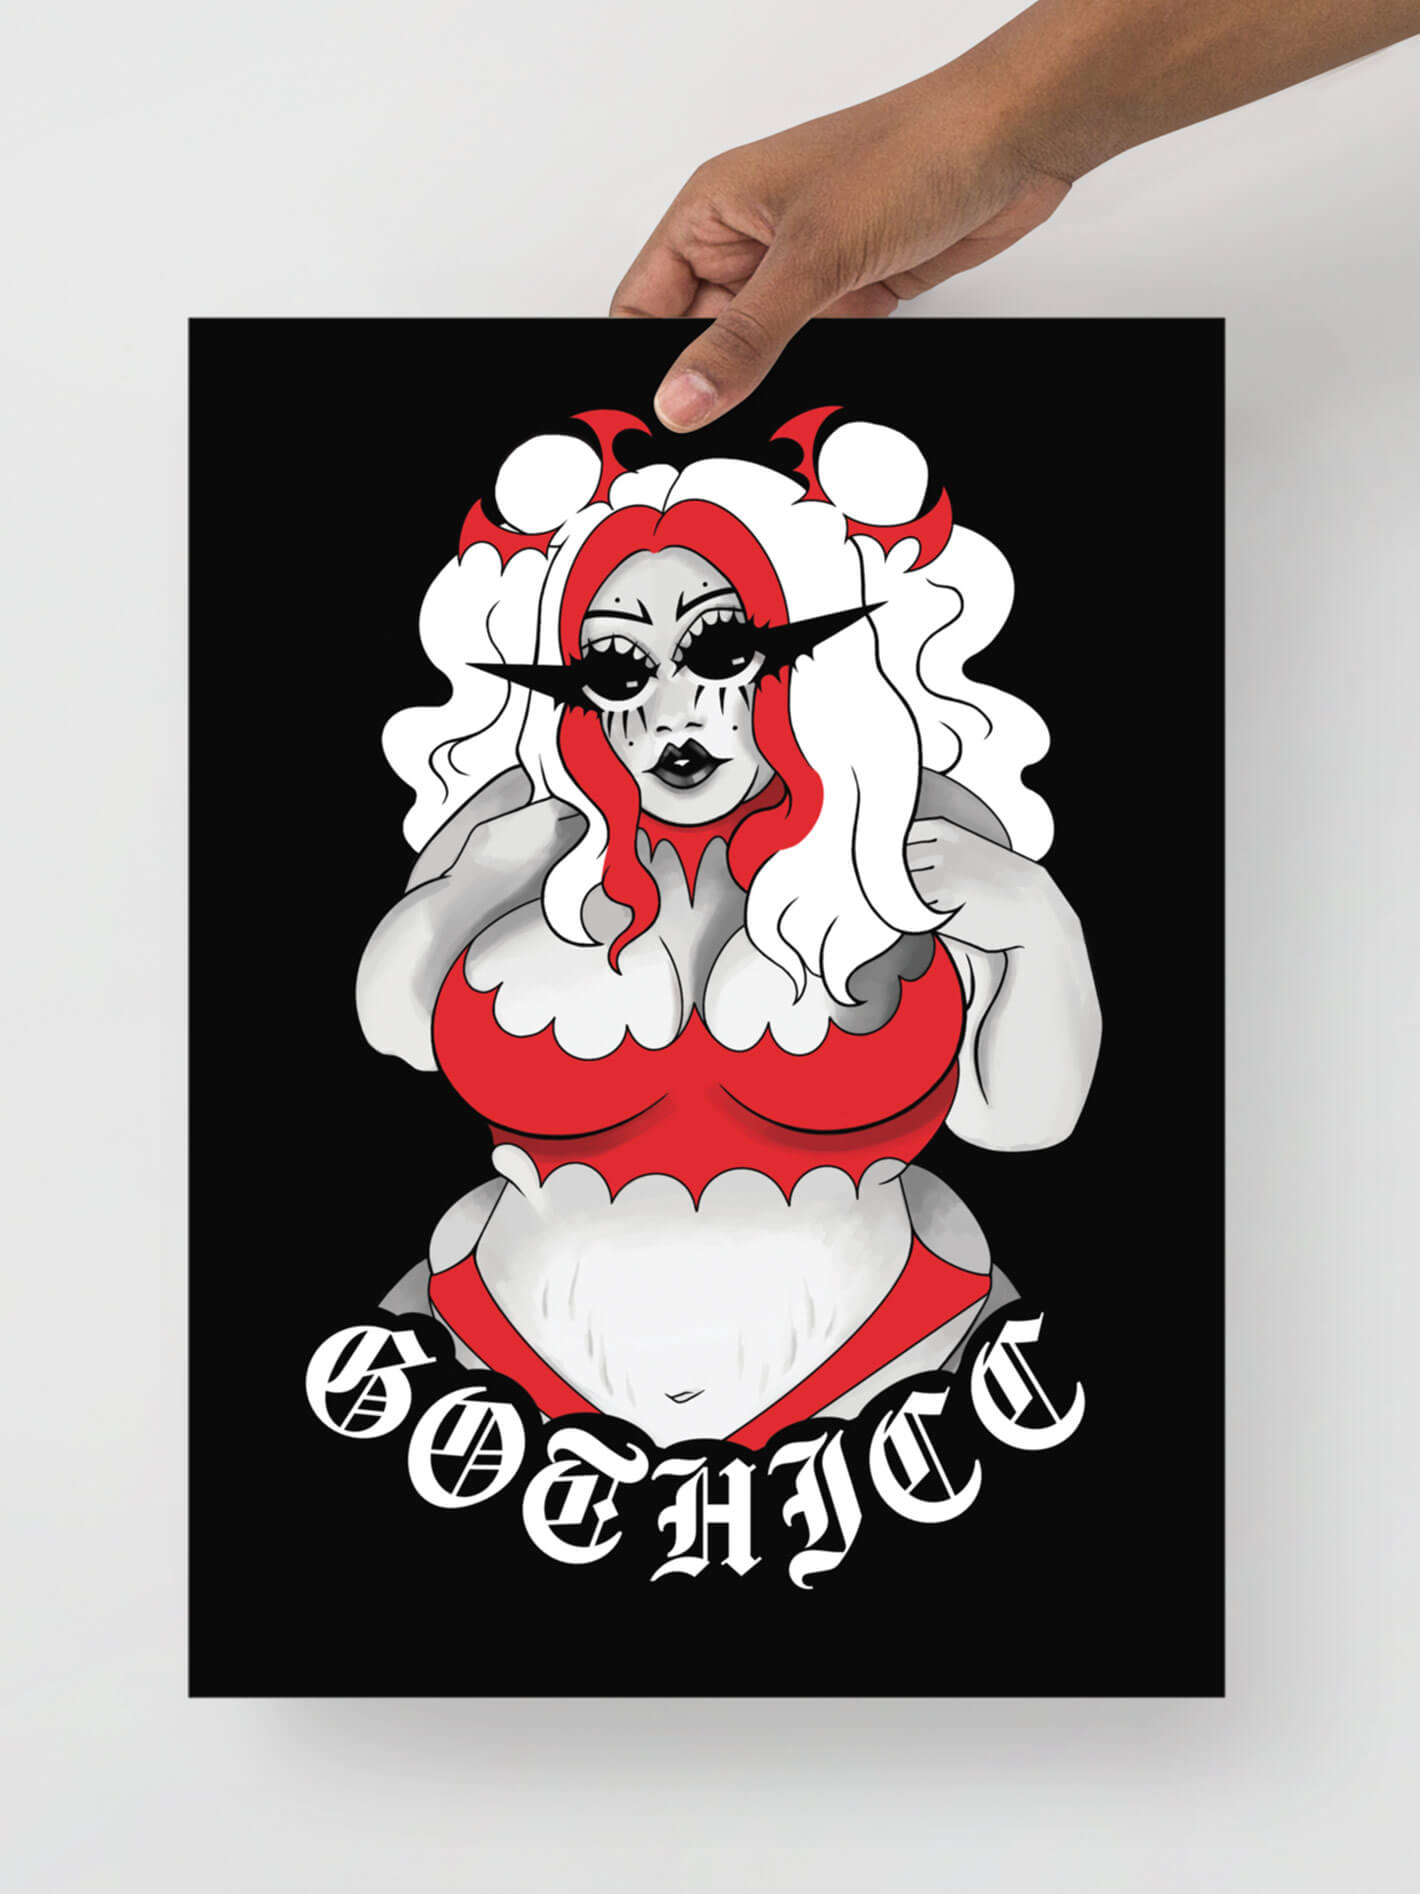 Gothicc pinup print.